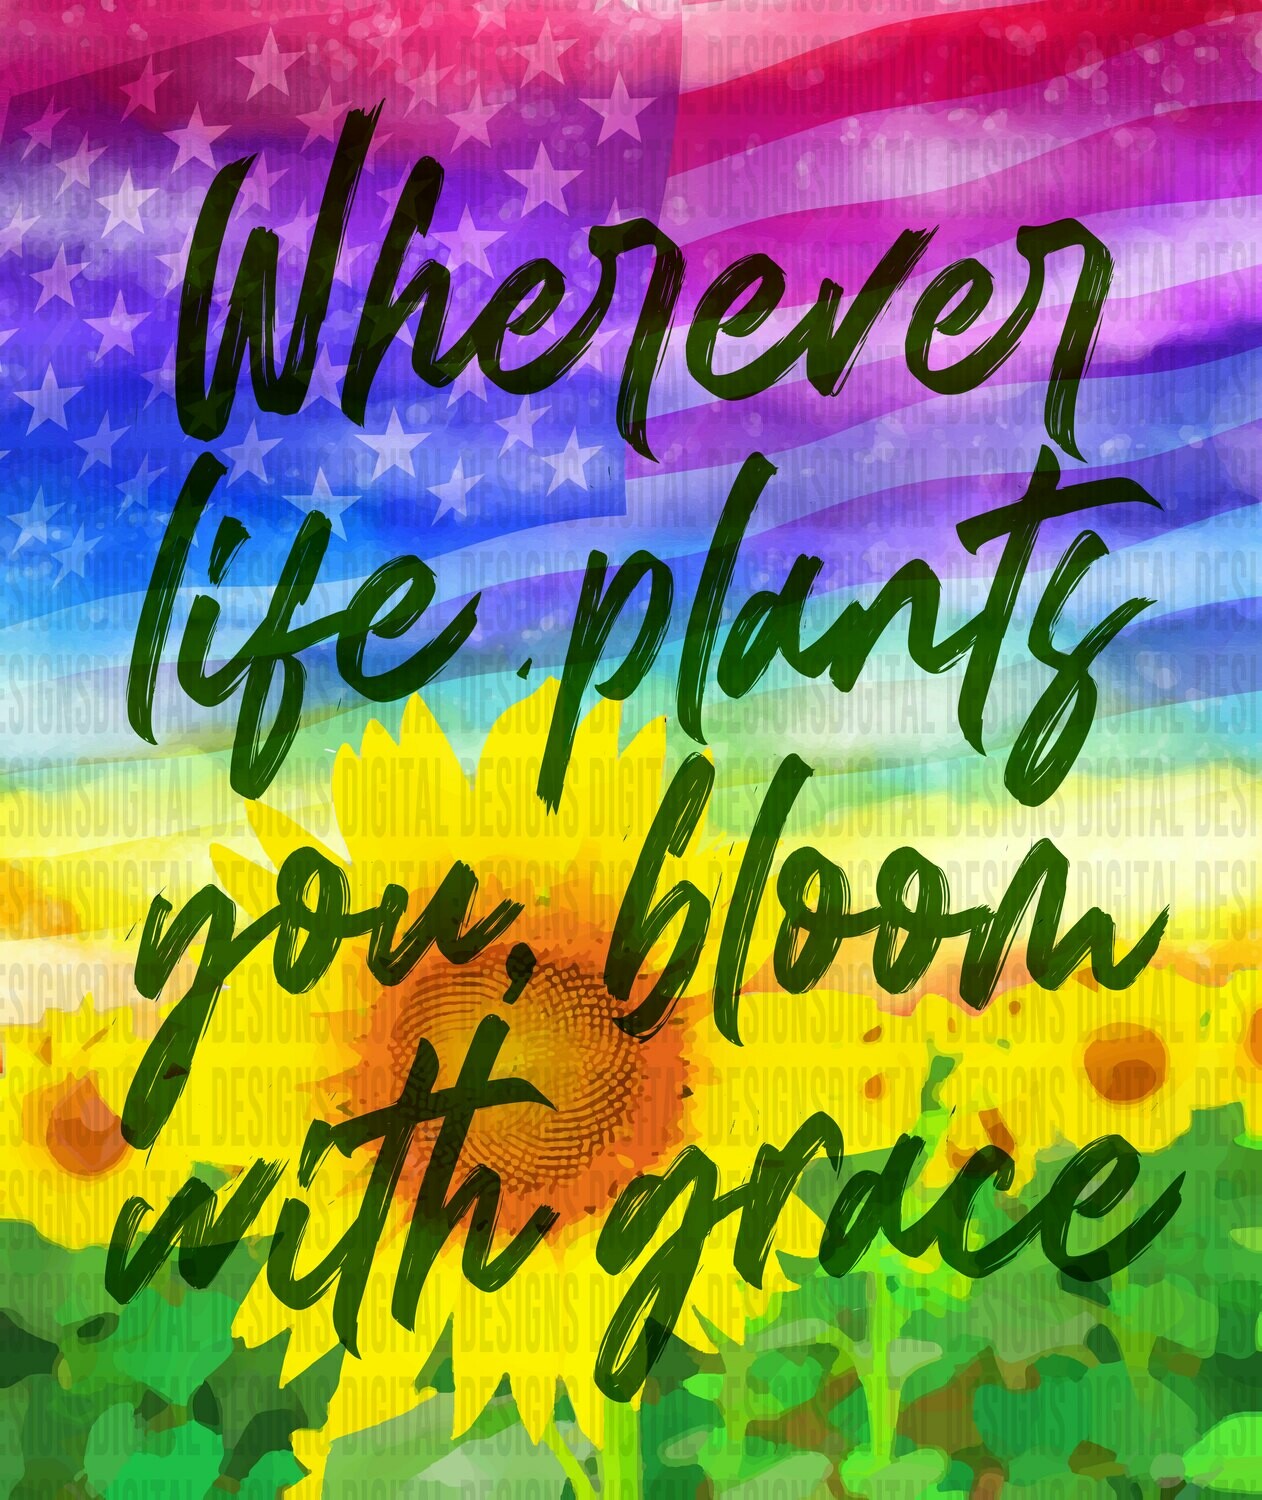 Wherever life plants you, Bloom with Grace